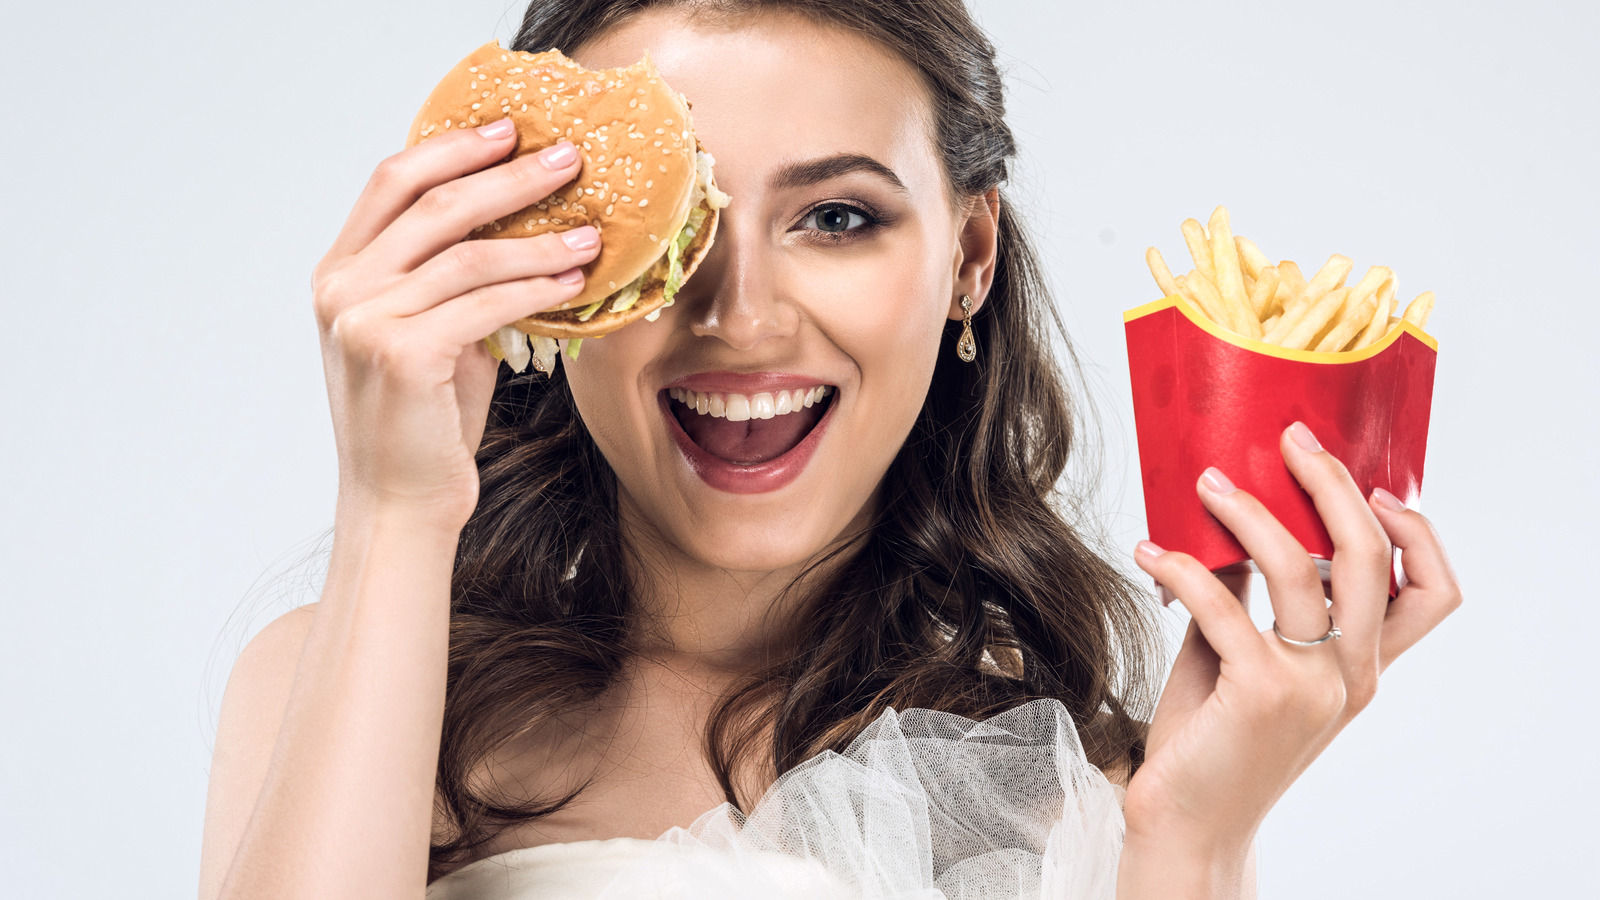 51% Would Want This Fast Food Restaurant To Cater Their Wedding Reception